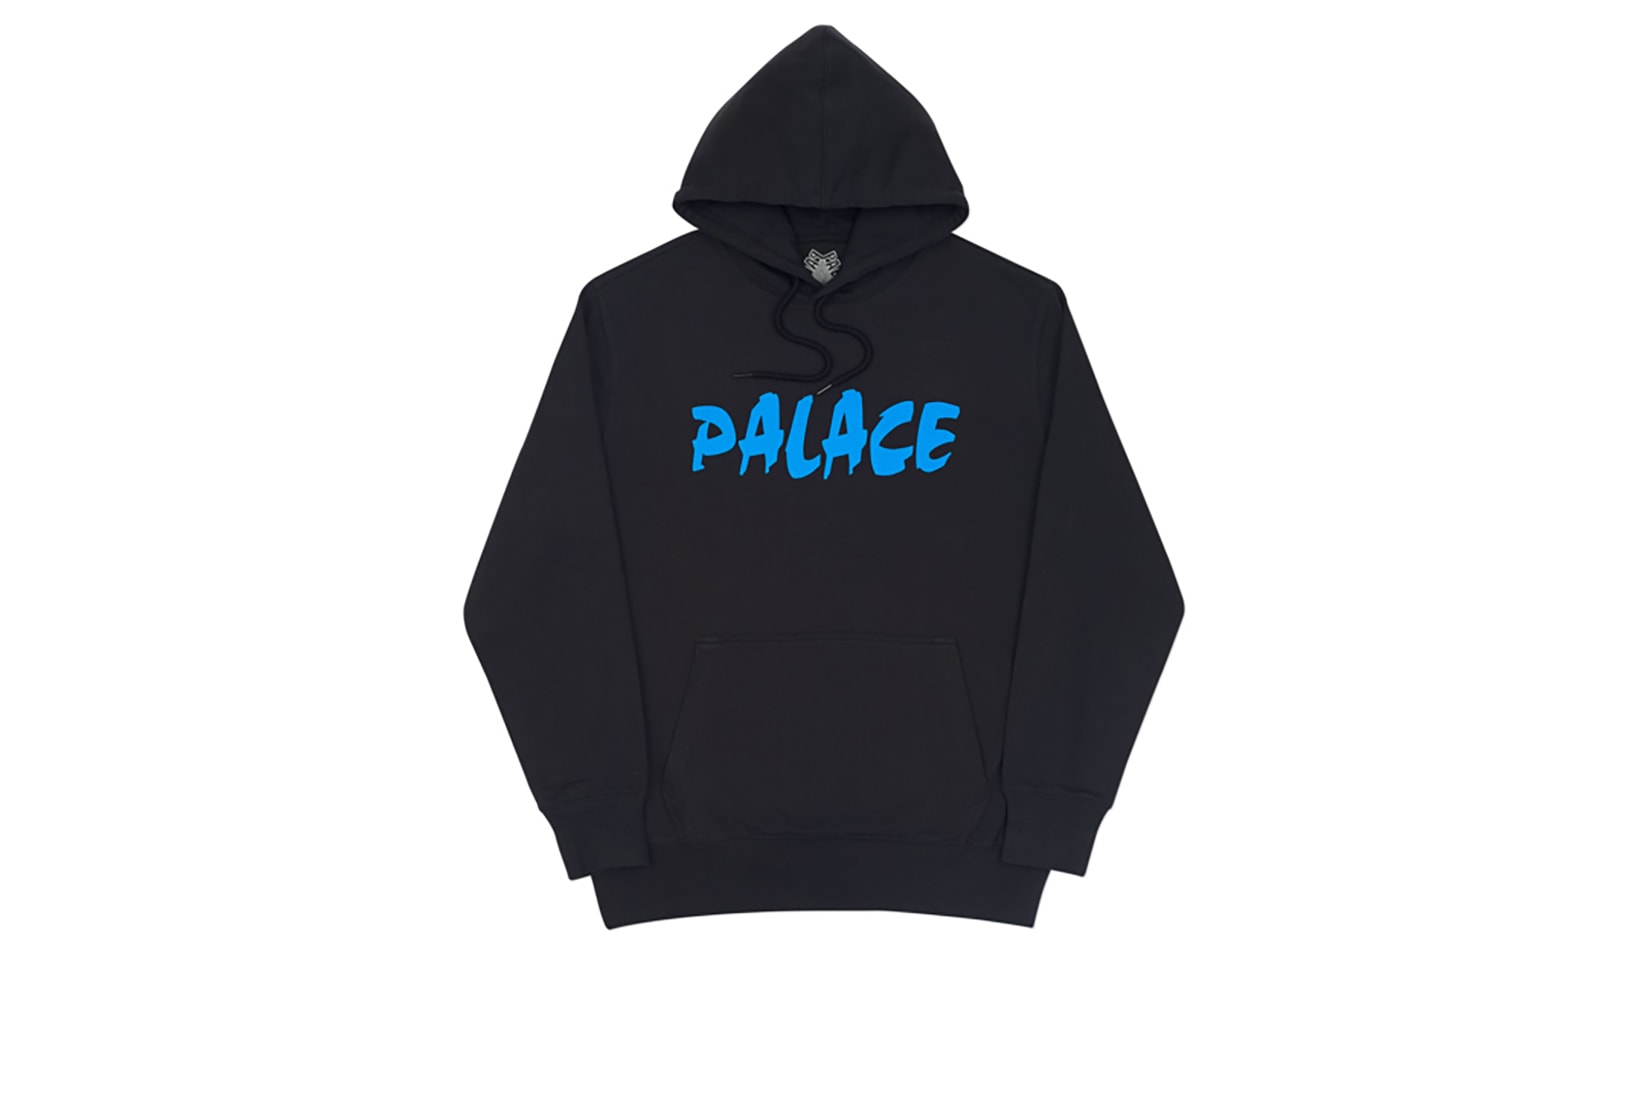 Palace 2017 Autumn Collection